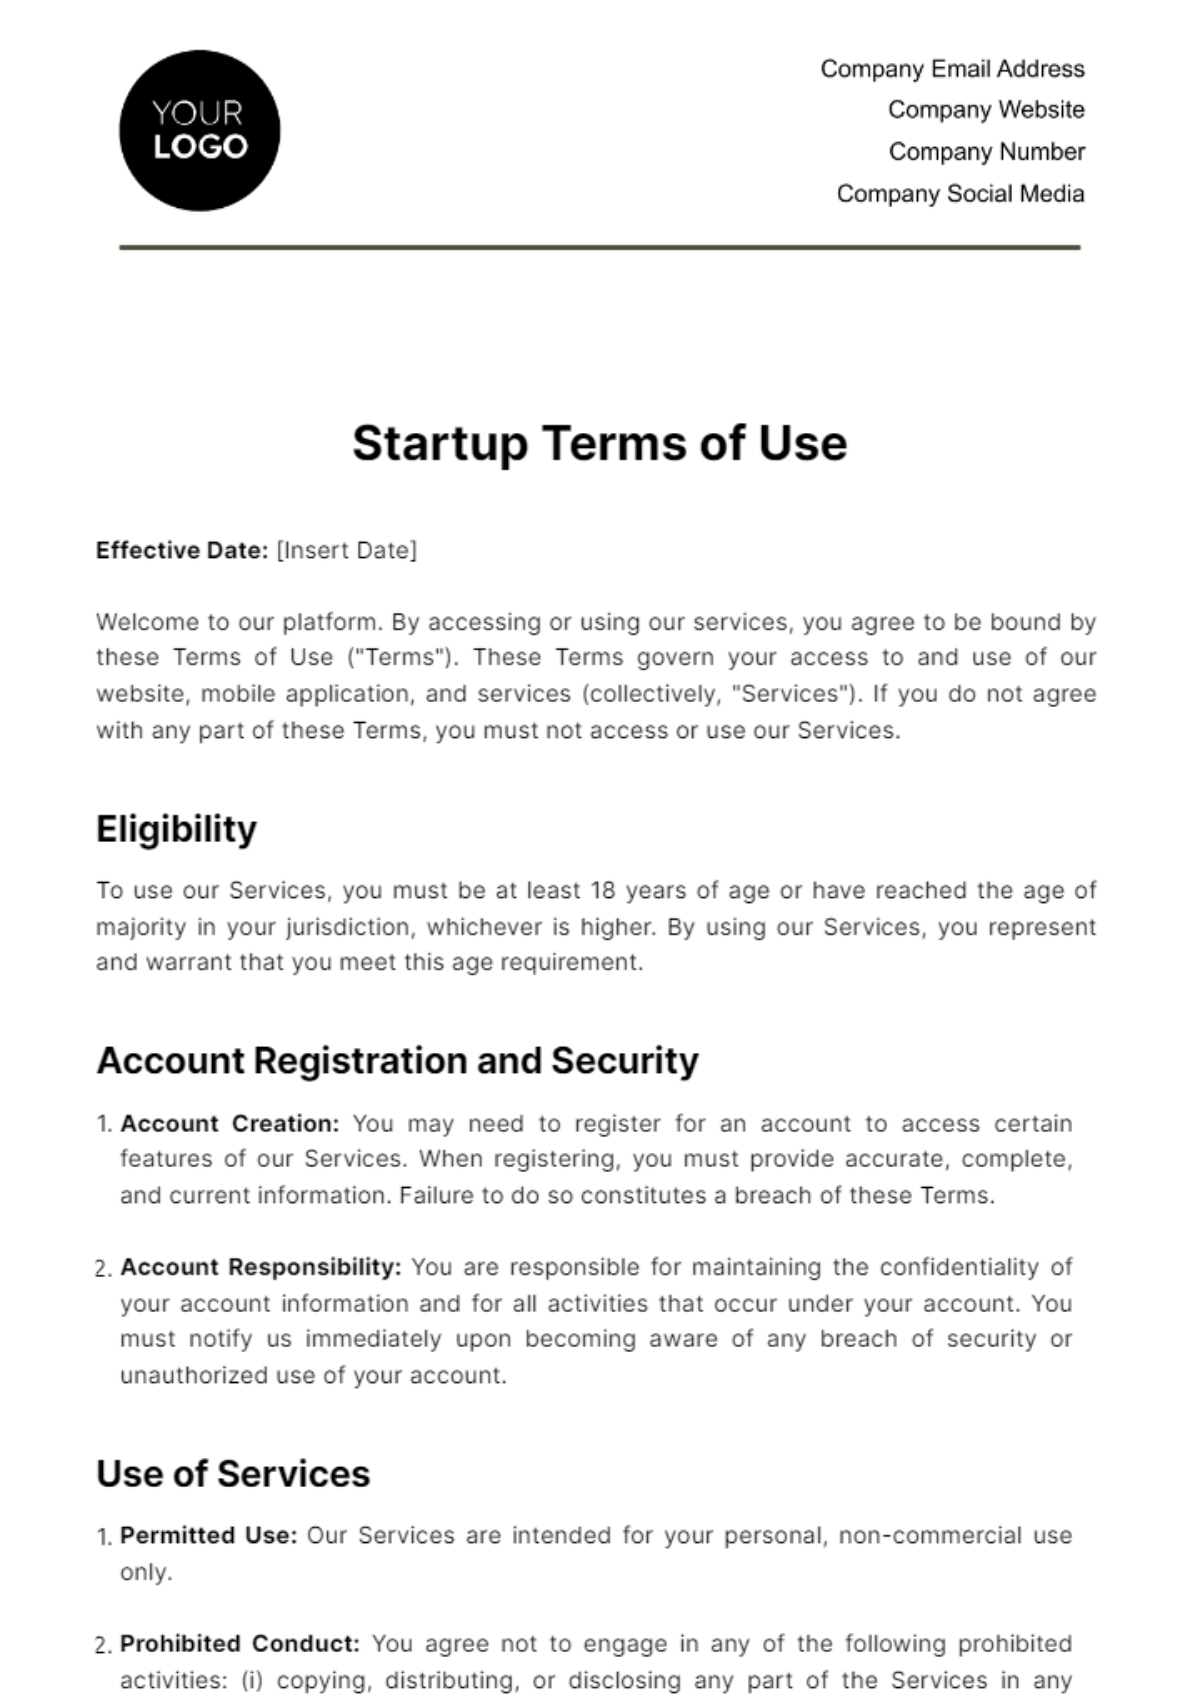 Startup Terms of Use Template